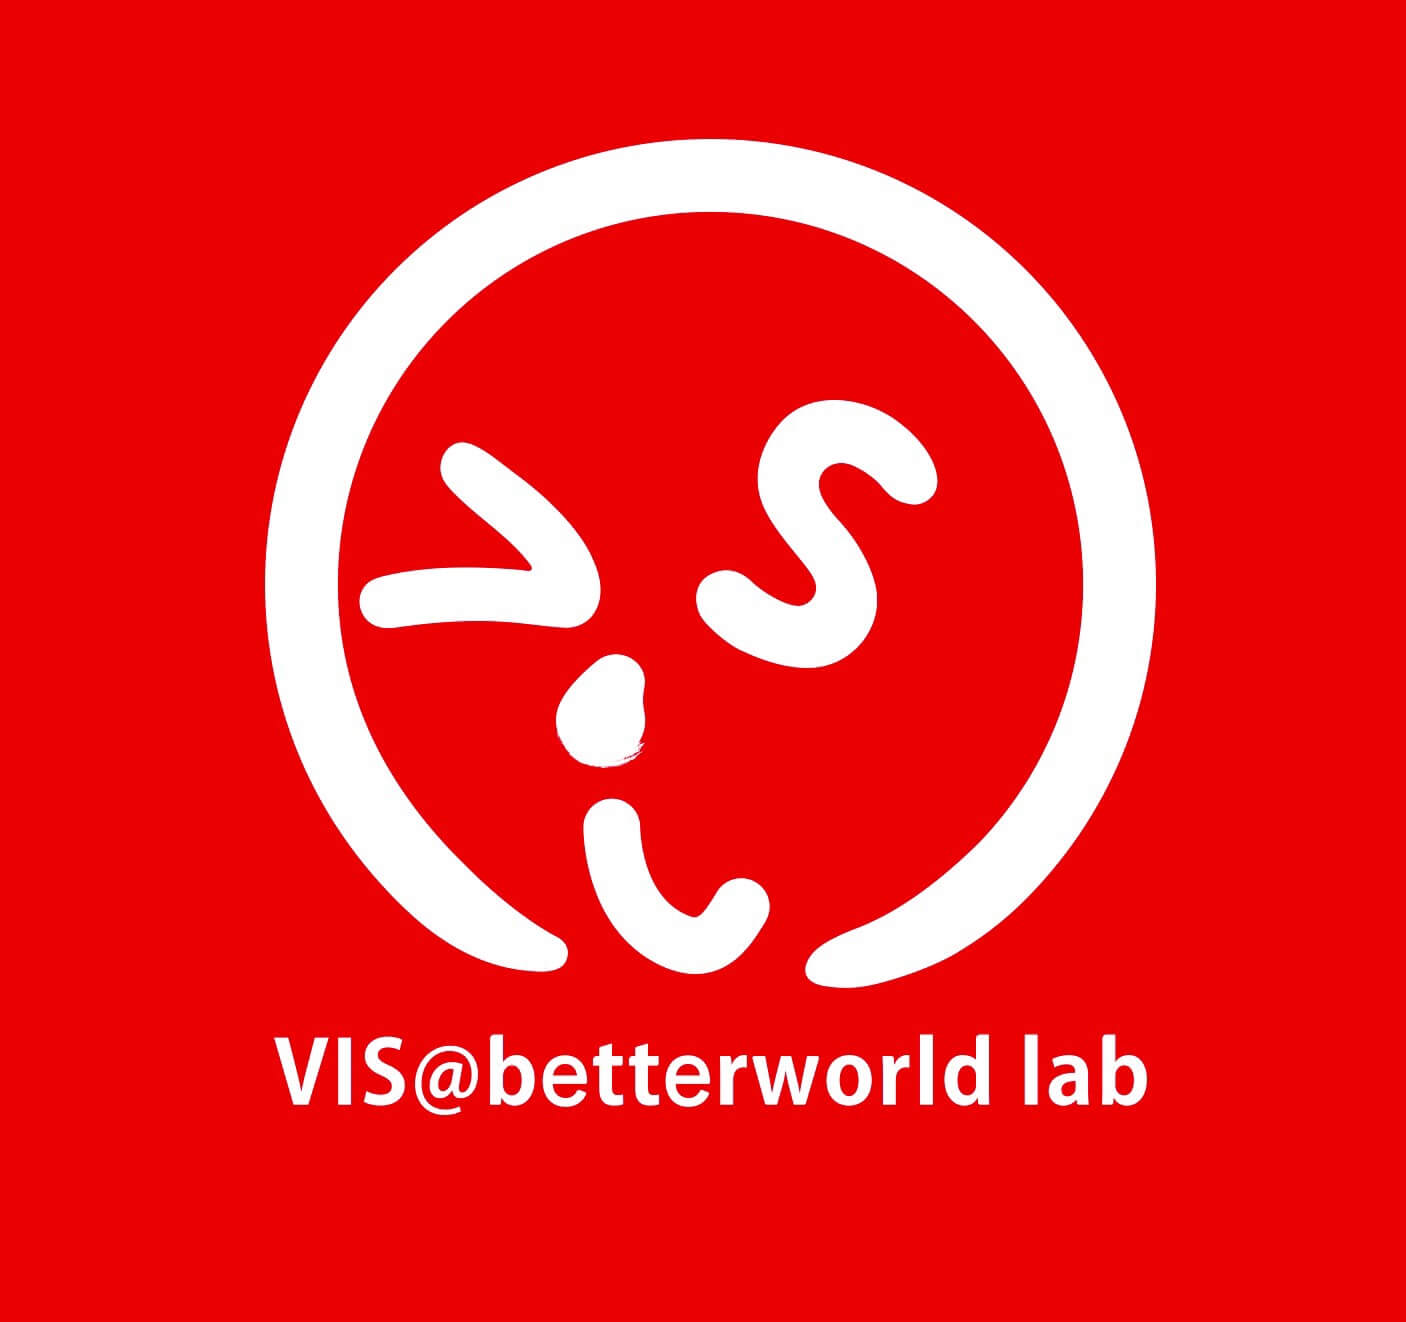 Teaching English and Living in Taiwan Jobs Available 教學工作, VIS@betterworld lab Experimental Education Institution Calling out for Full-time Math/PBL Teacher wanted! image